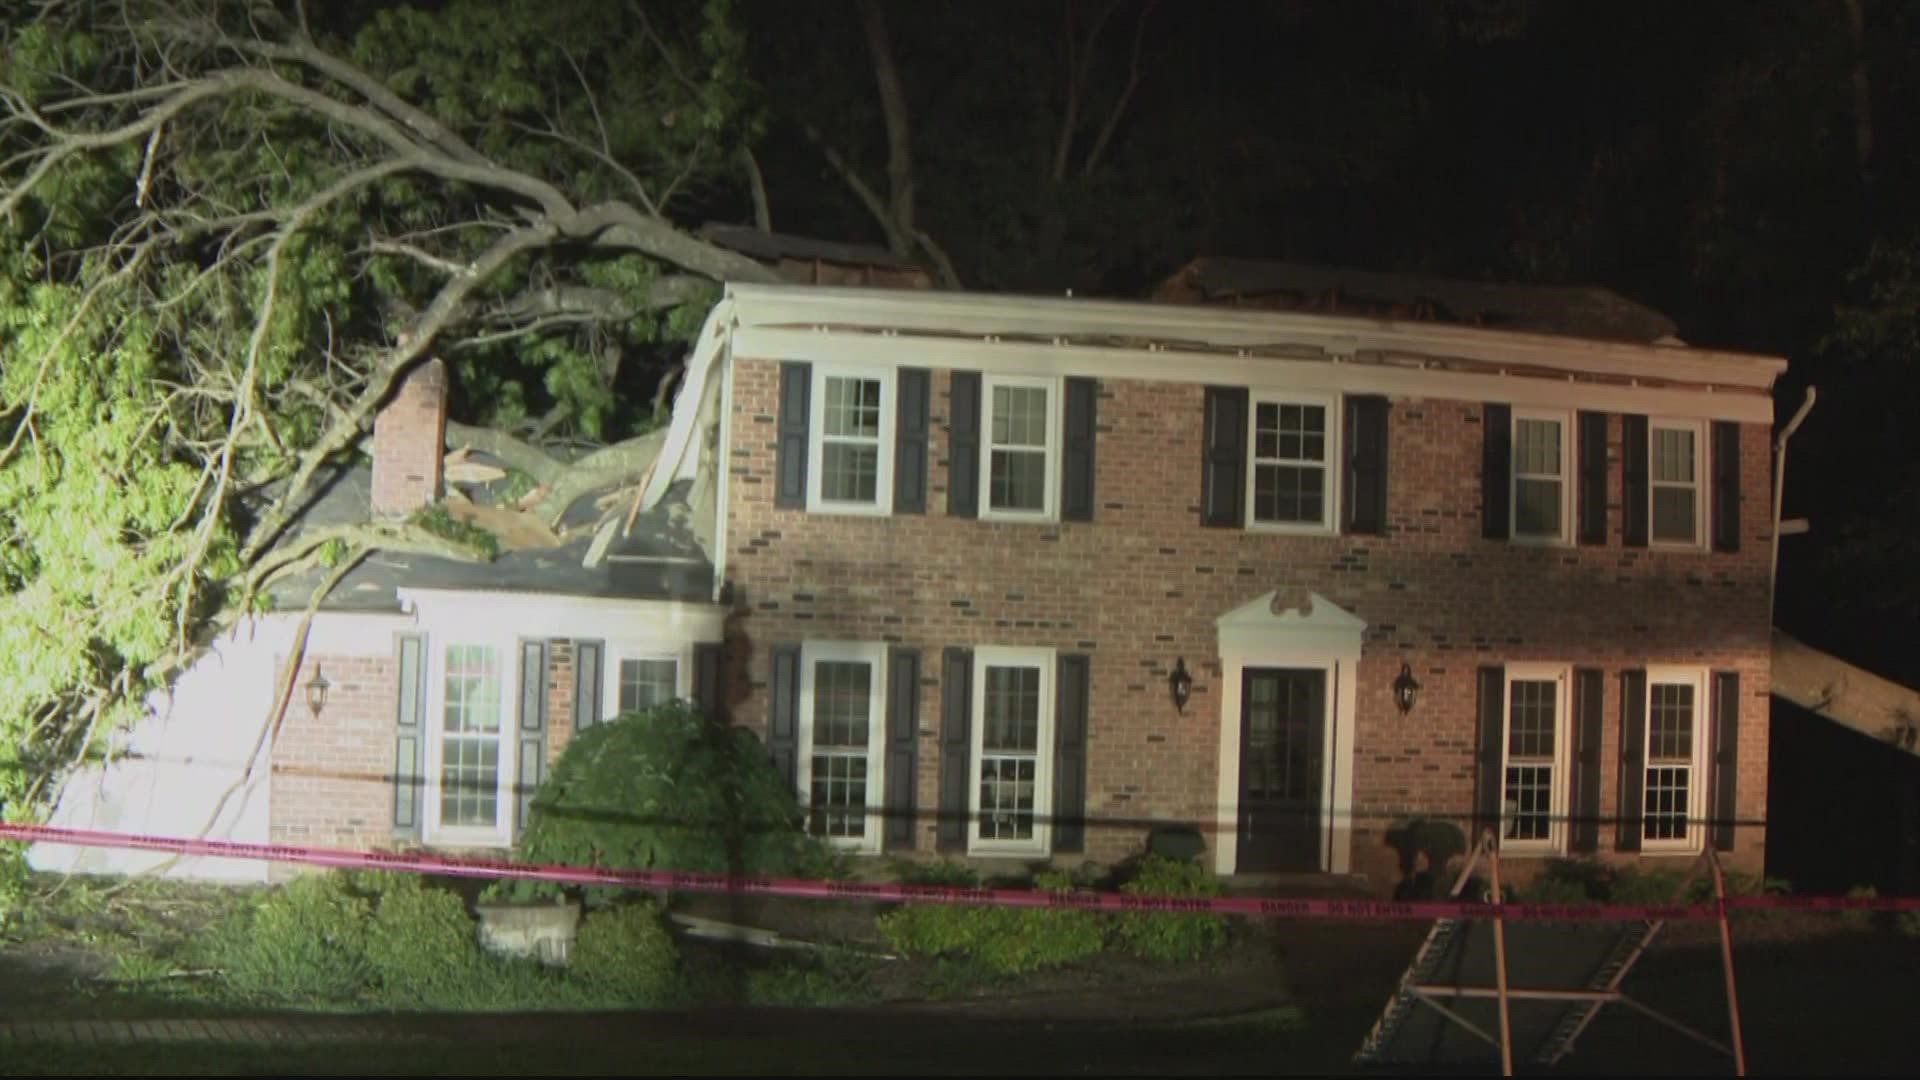 The tree caused extensive damage to the house and no one was inside at the time of the incident.